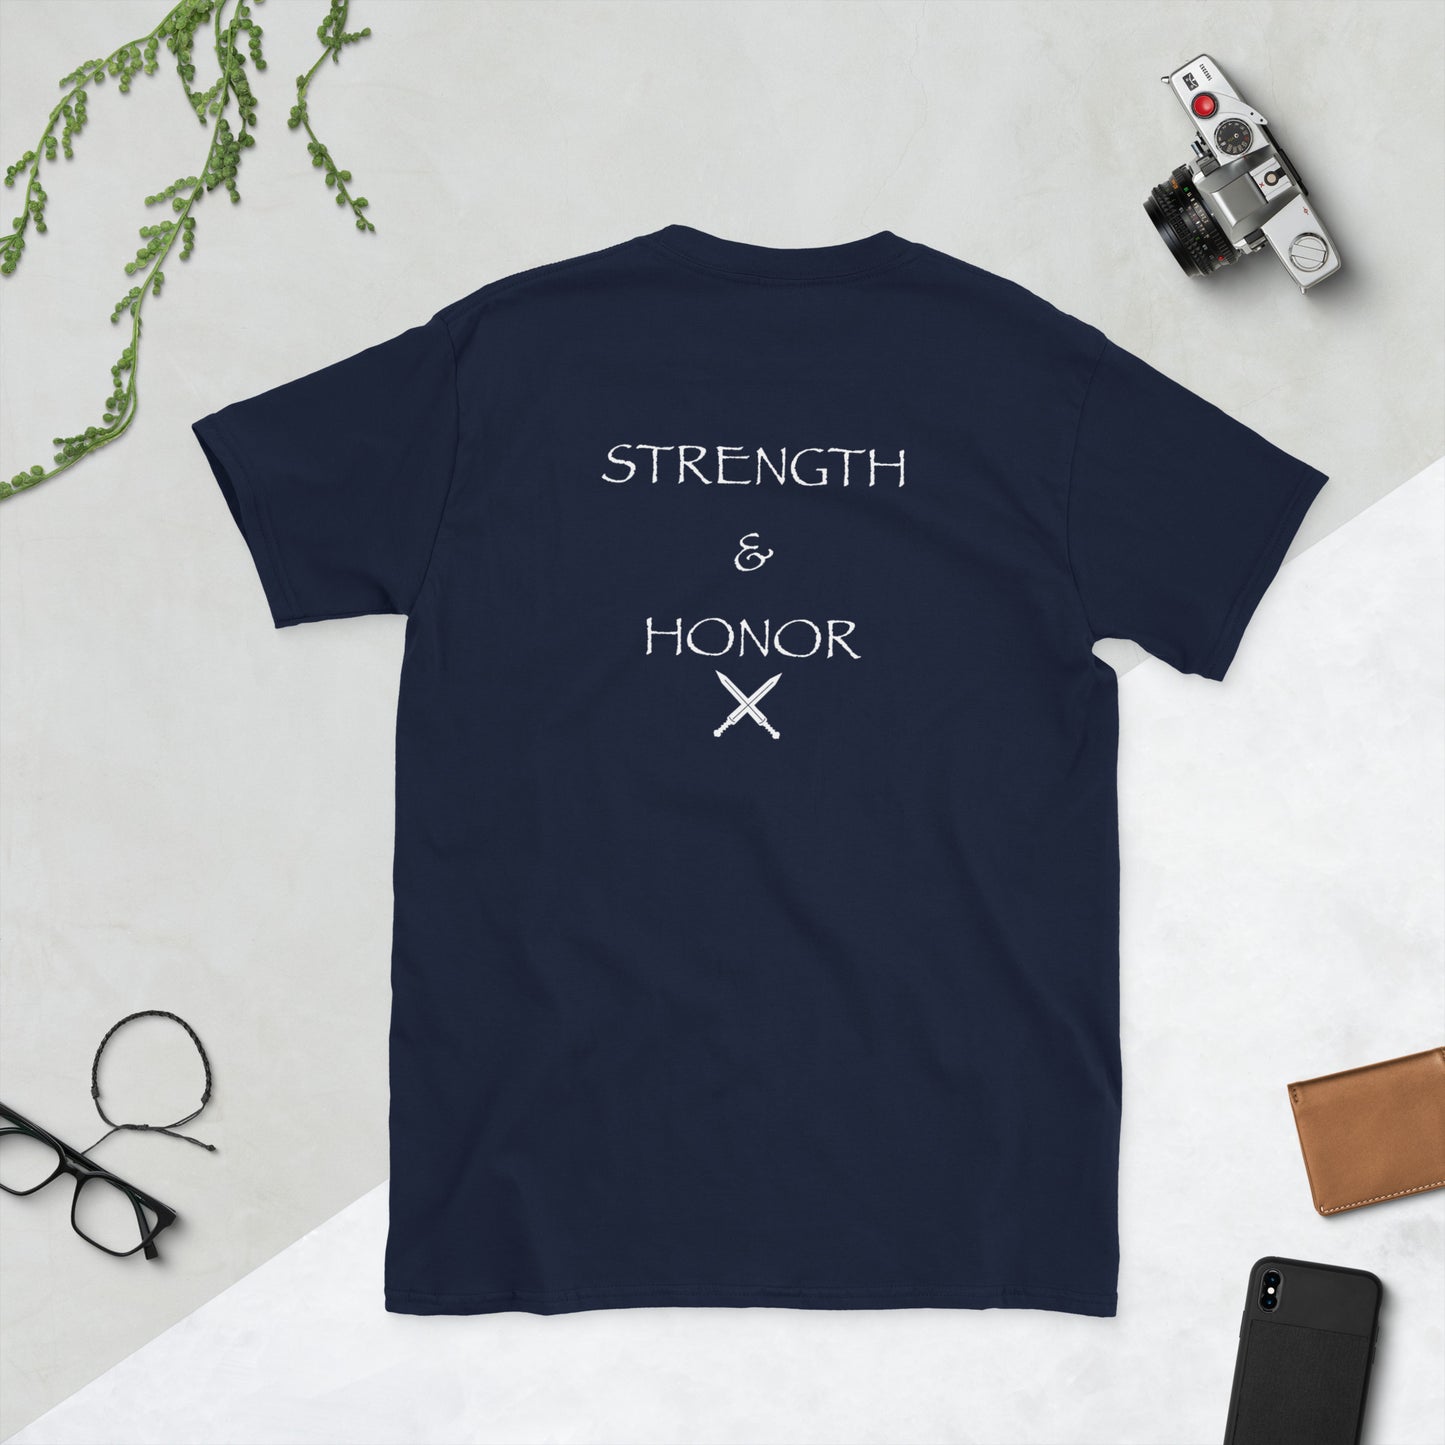 3SIDE GLADIATOR “STRENGTH AND HONOR” SHORT SLEEVE T-SHIRT